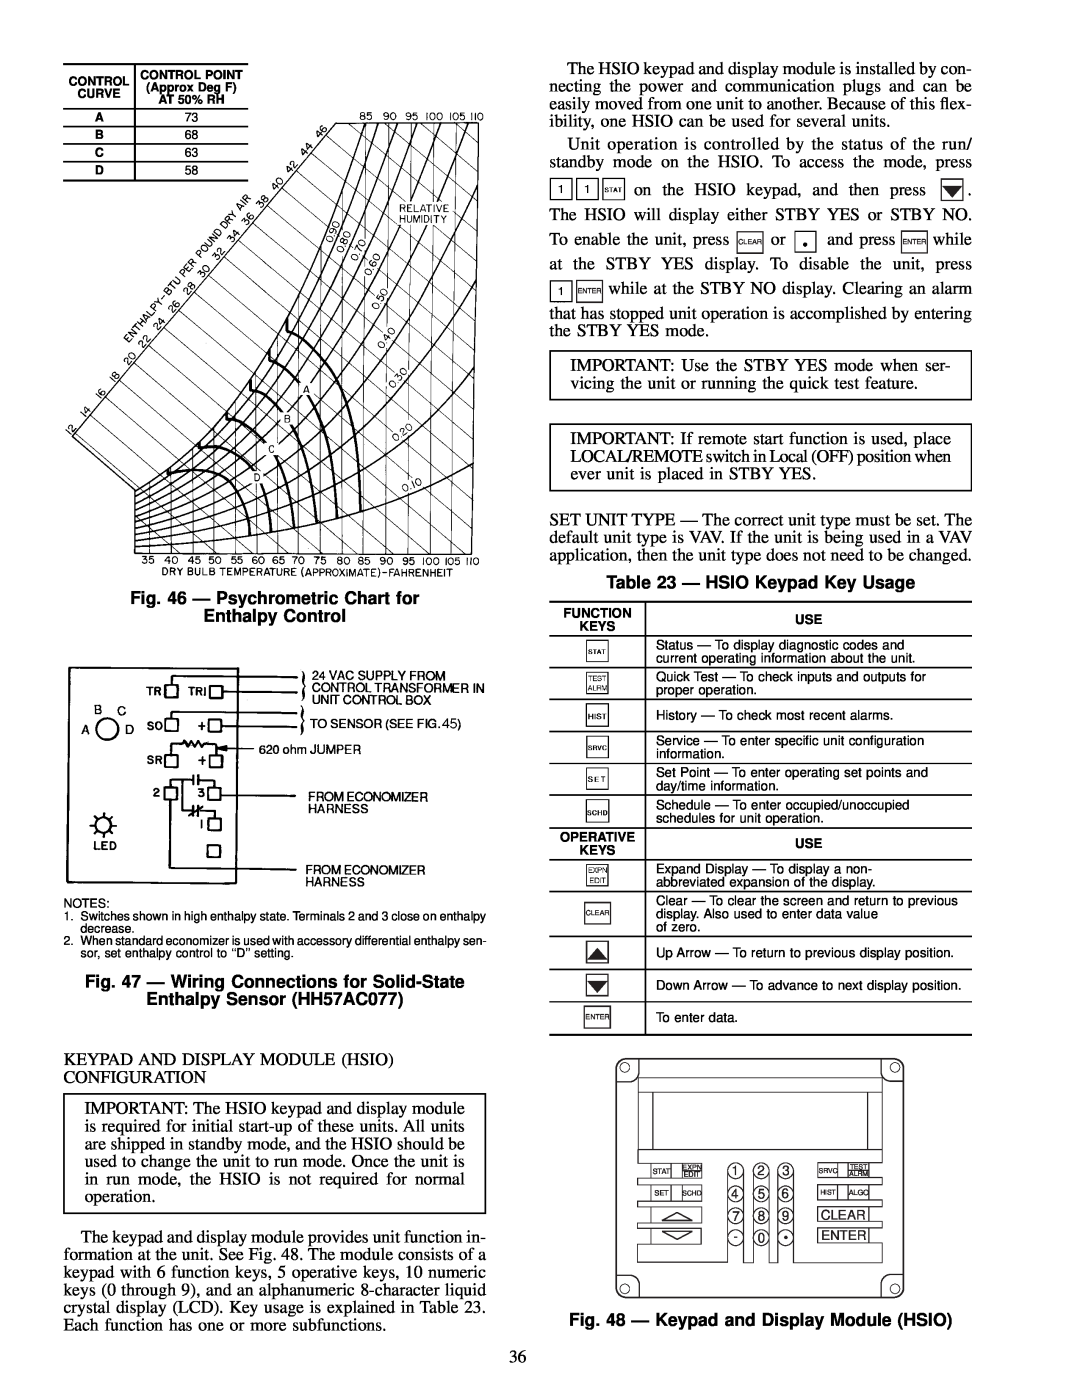 Carrier MPE62L-10R, 50MP62L-10R, 48MPD Ð Psychrometric Chart for, Enthalpy Control, Ð Wiring Connections for Solid-State 